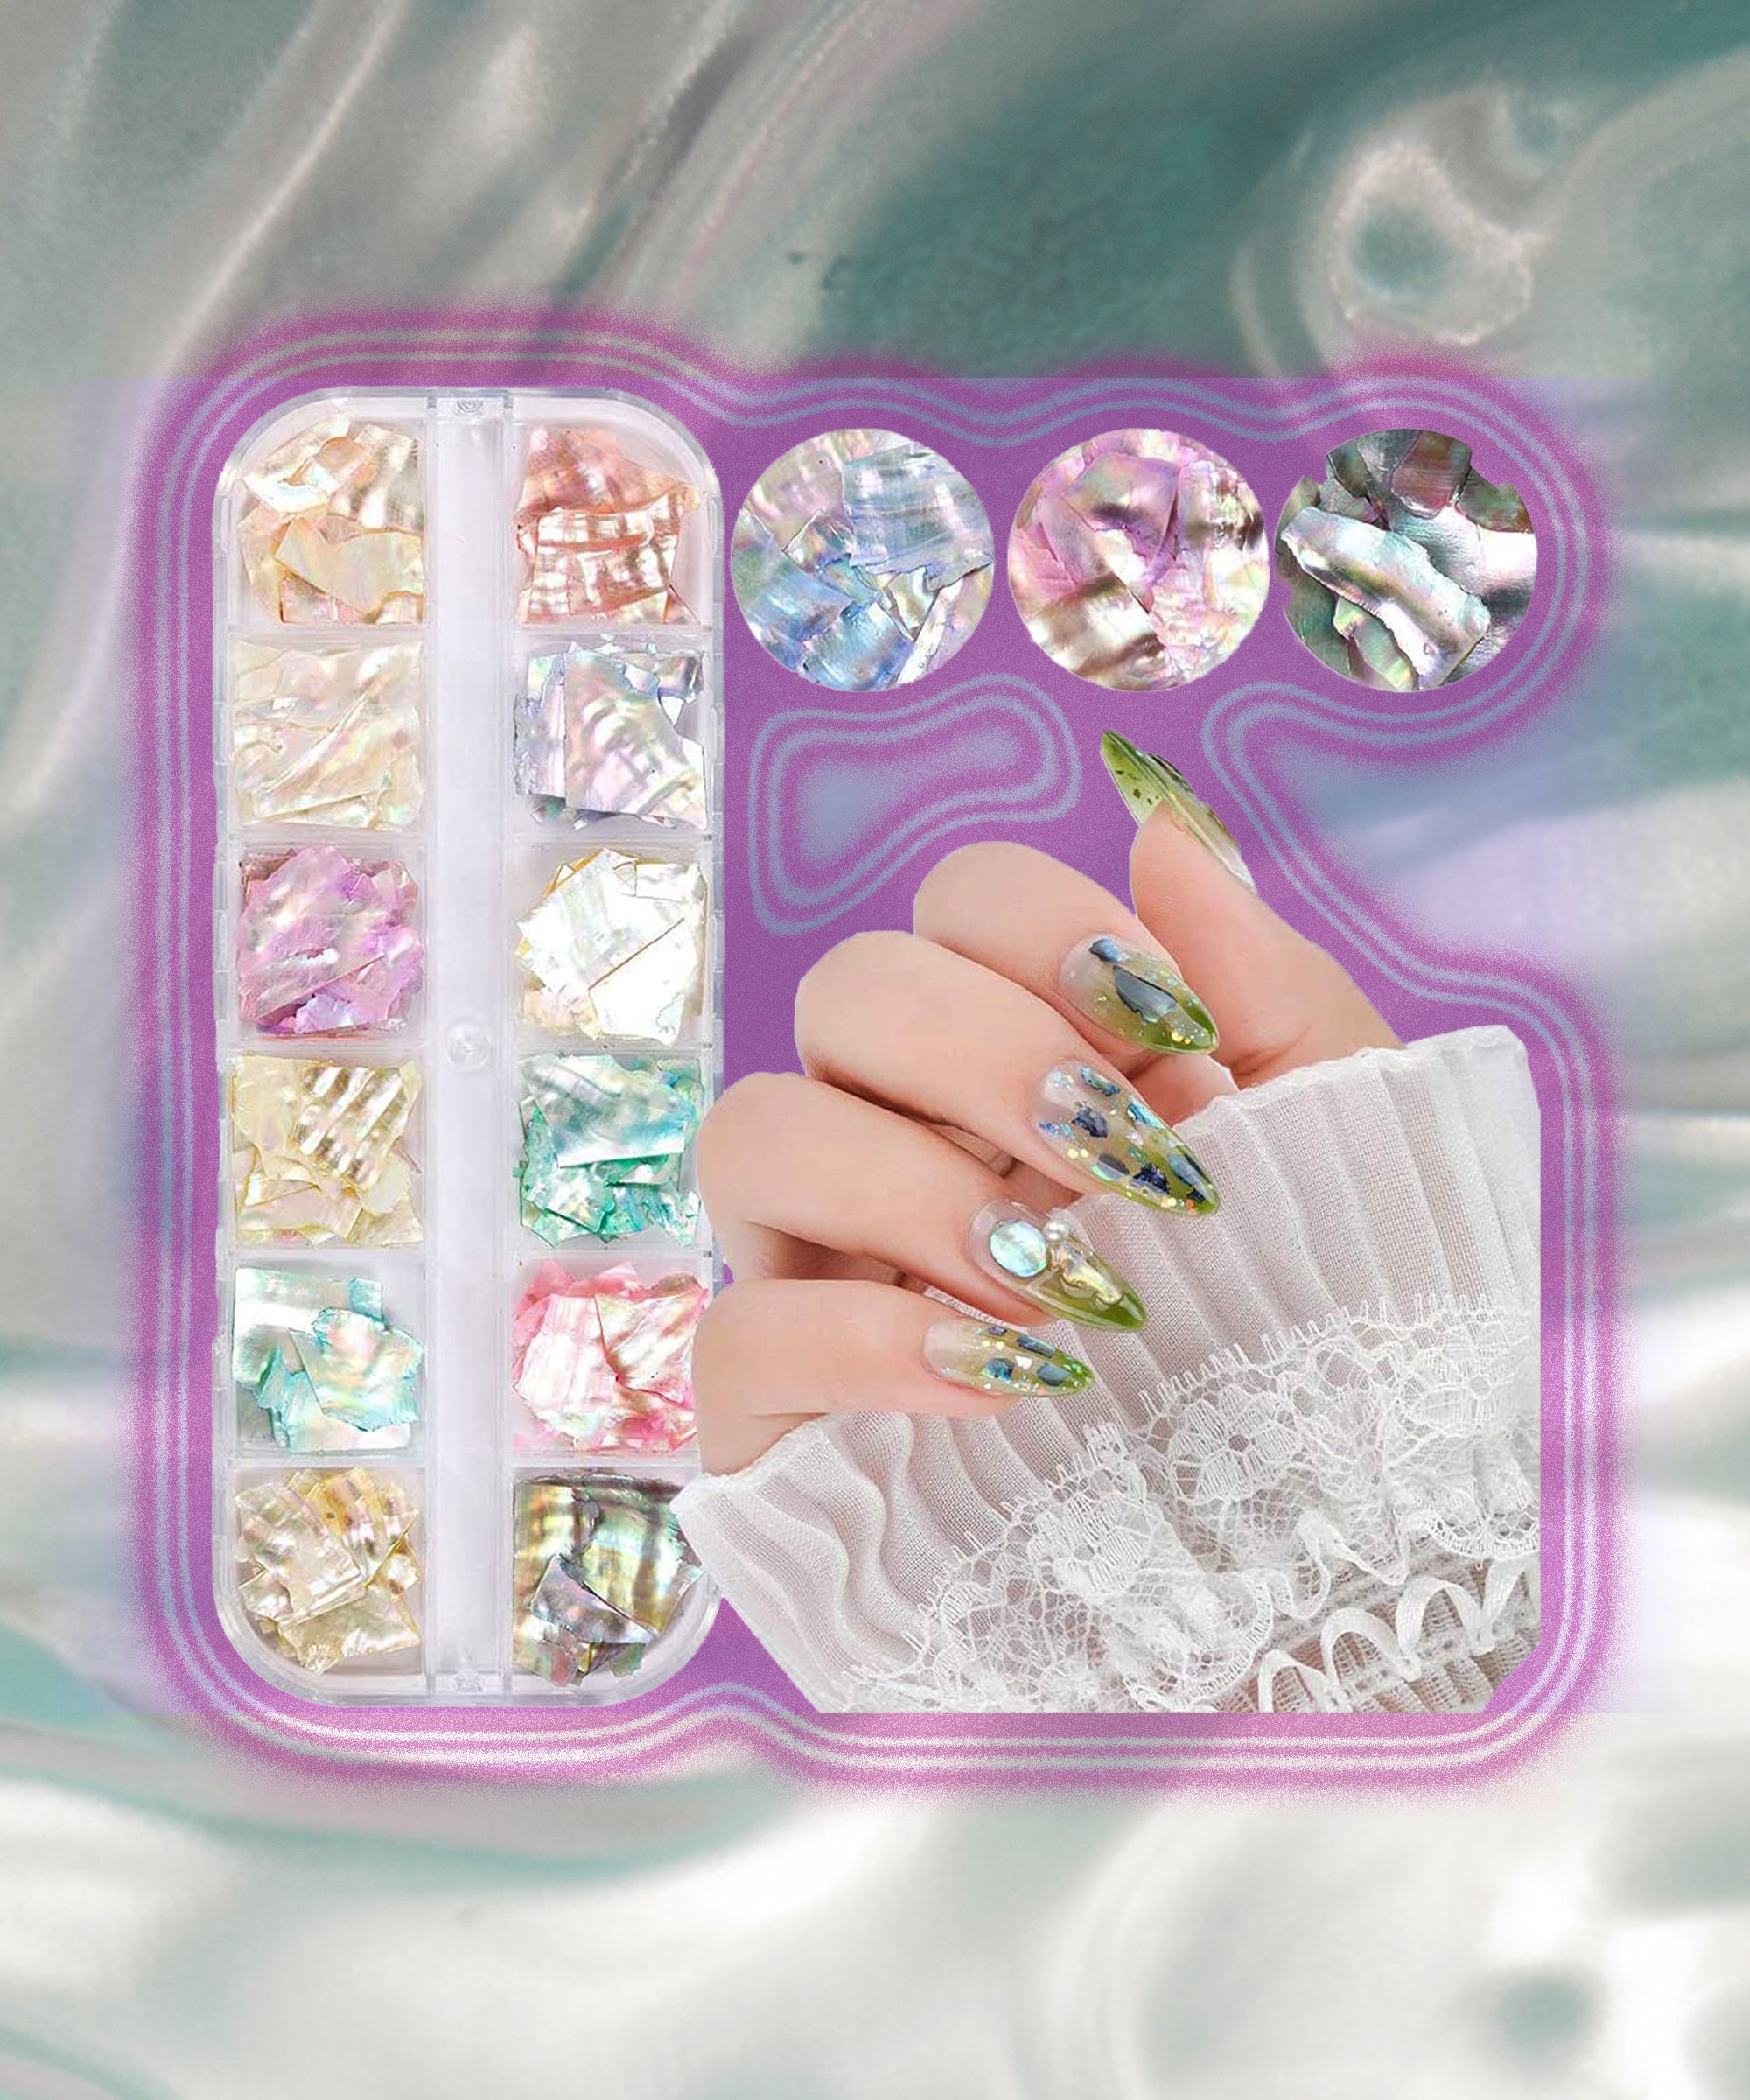 opvise 50Pcs Nail Art Jewelry Exquisite Bow Charms Accessories Colored  Resin Nail Art Decoration Nail Supplies - Walmart.com